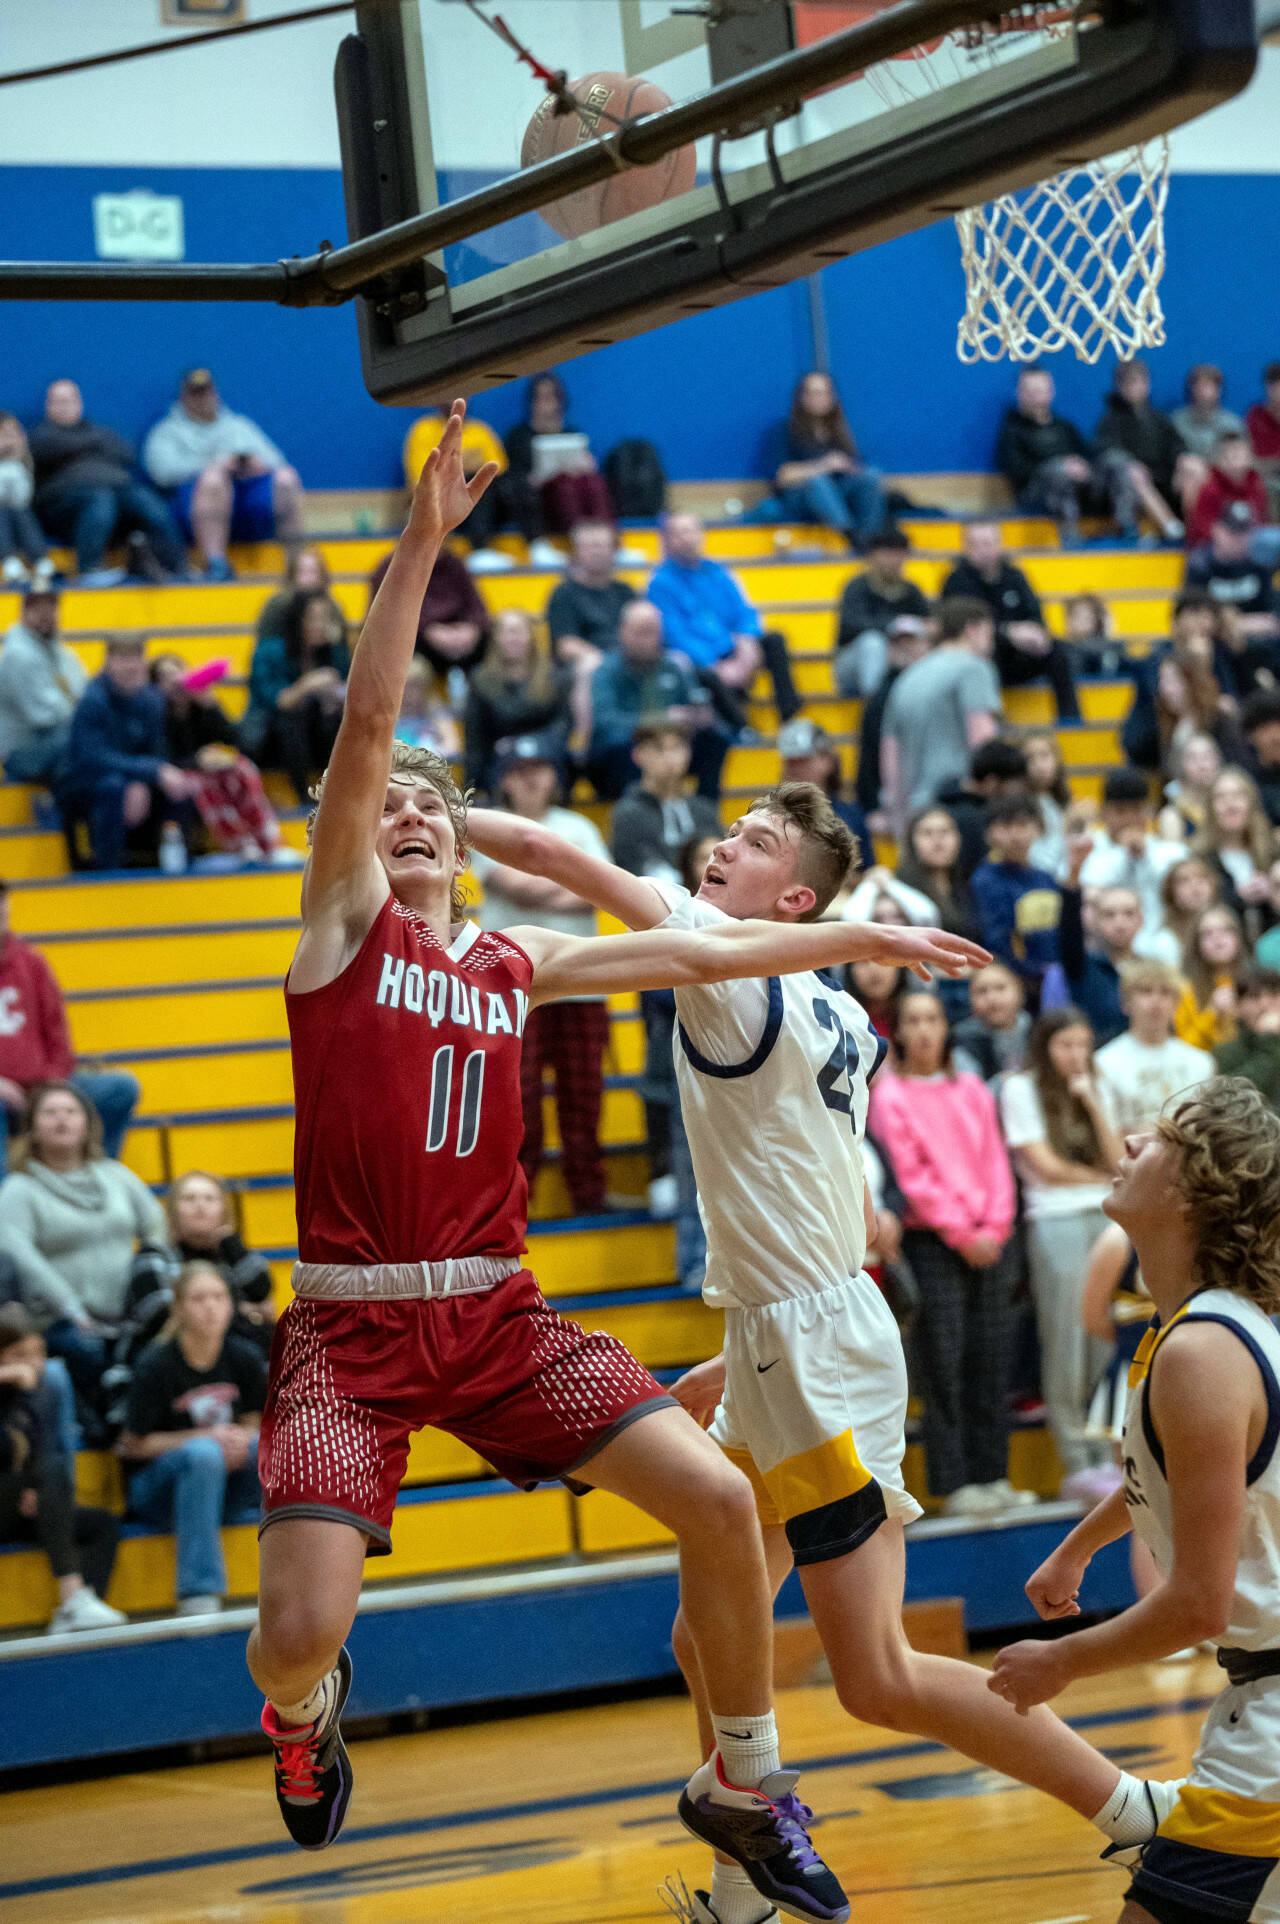 PHOTO BY FOREST WORGUM Hoquiam’s Zander Jump (11) scores two of his game-high 24 points while defended by Aberdeen’s Baylor Ainsworth in the Grizzlies’ 66-47 win on Monday at Sam Benn Gym in Aberdeen.